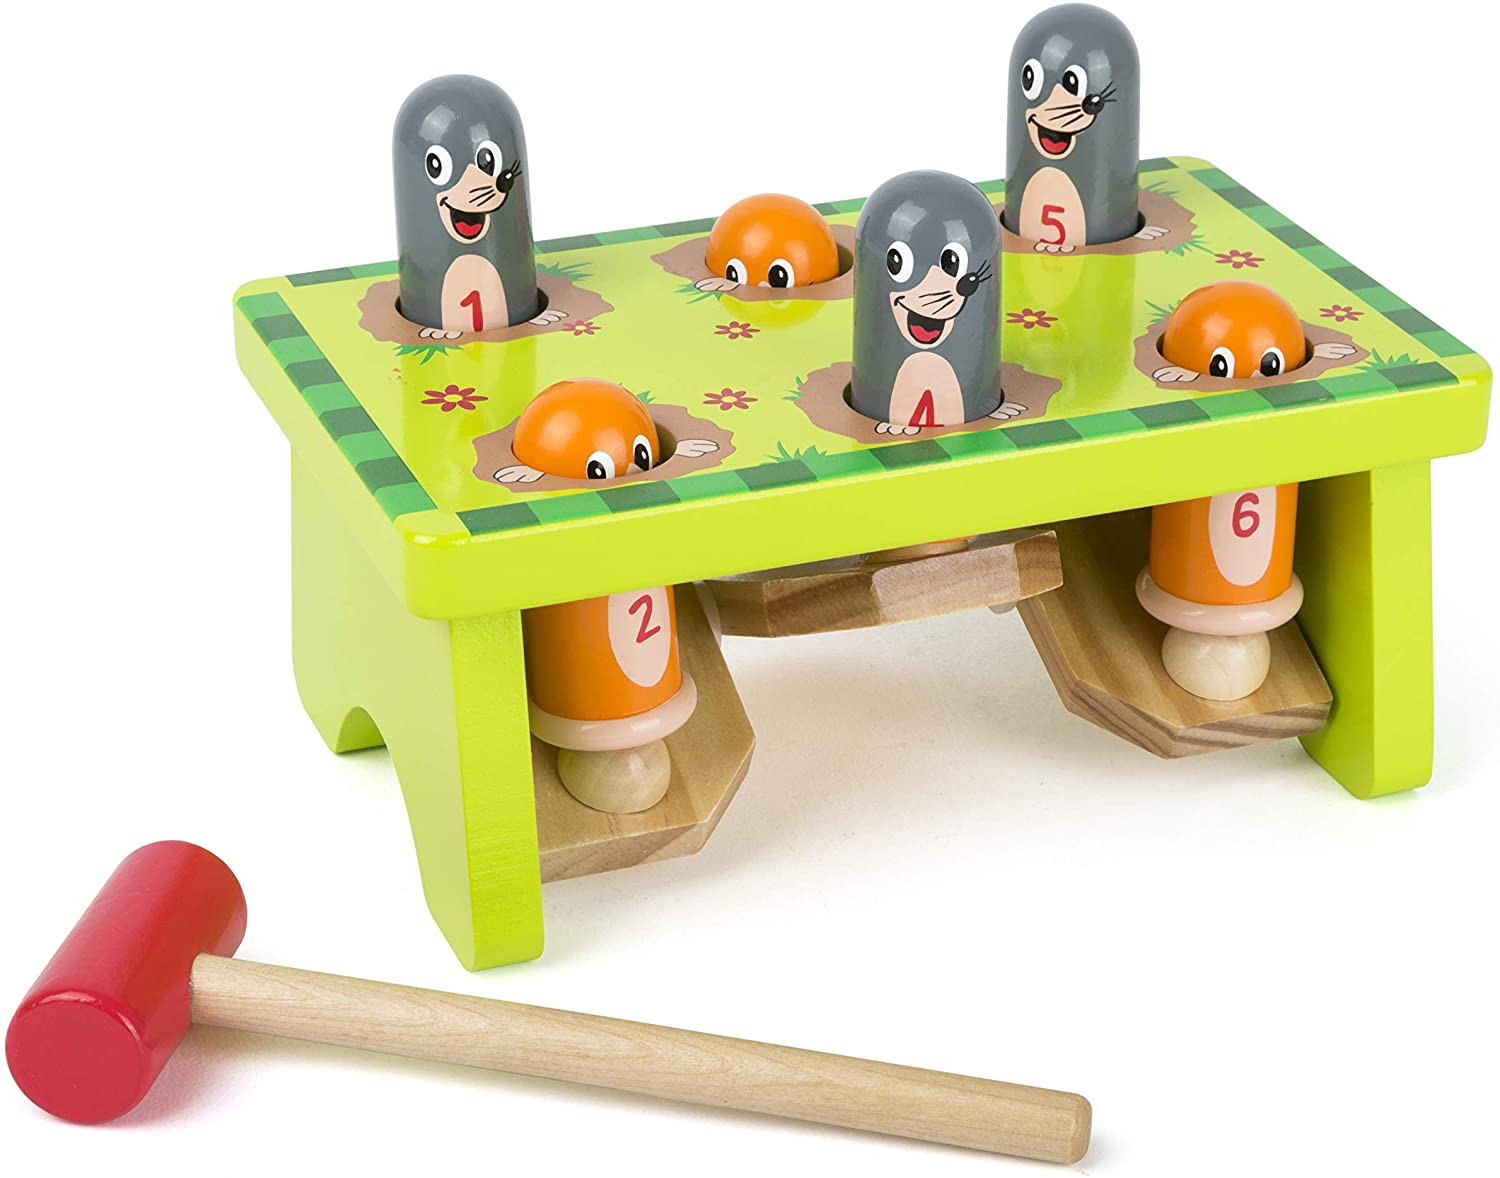 Small Foot 11162 Whack-A-Mole Bench 100% Certified Wood Robust Hammer Game Suitable for Children from 18 Months